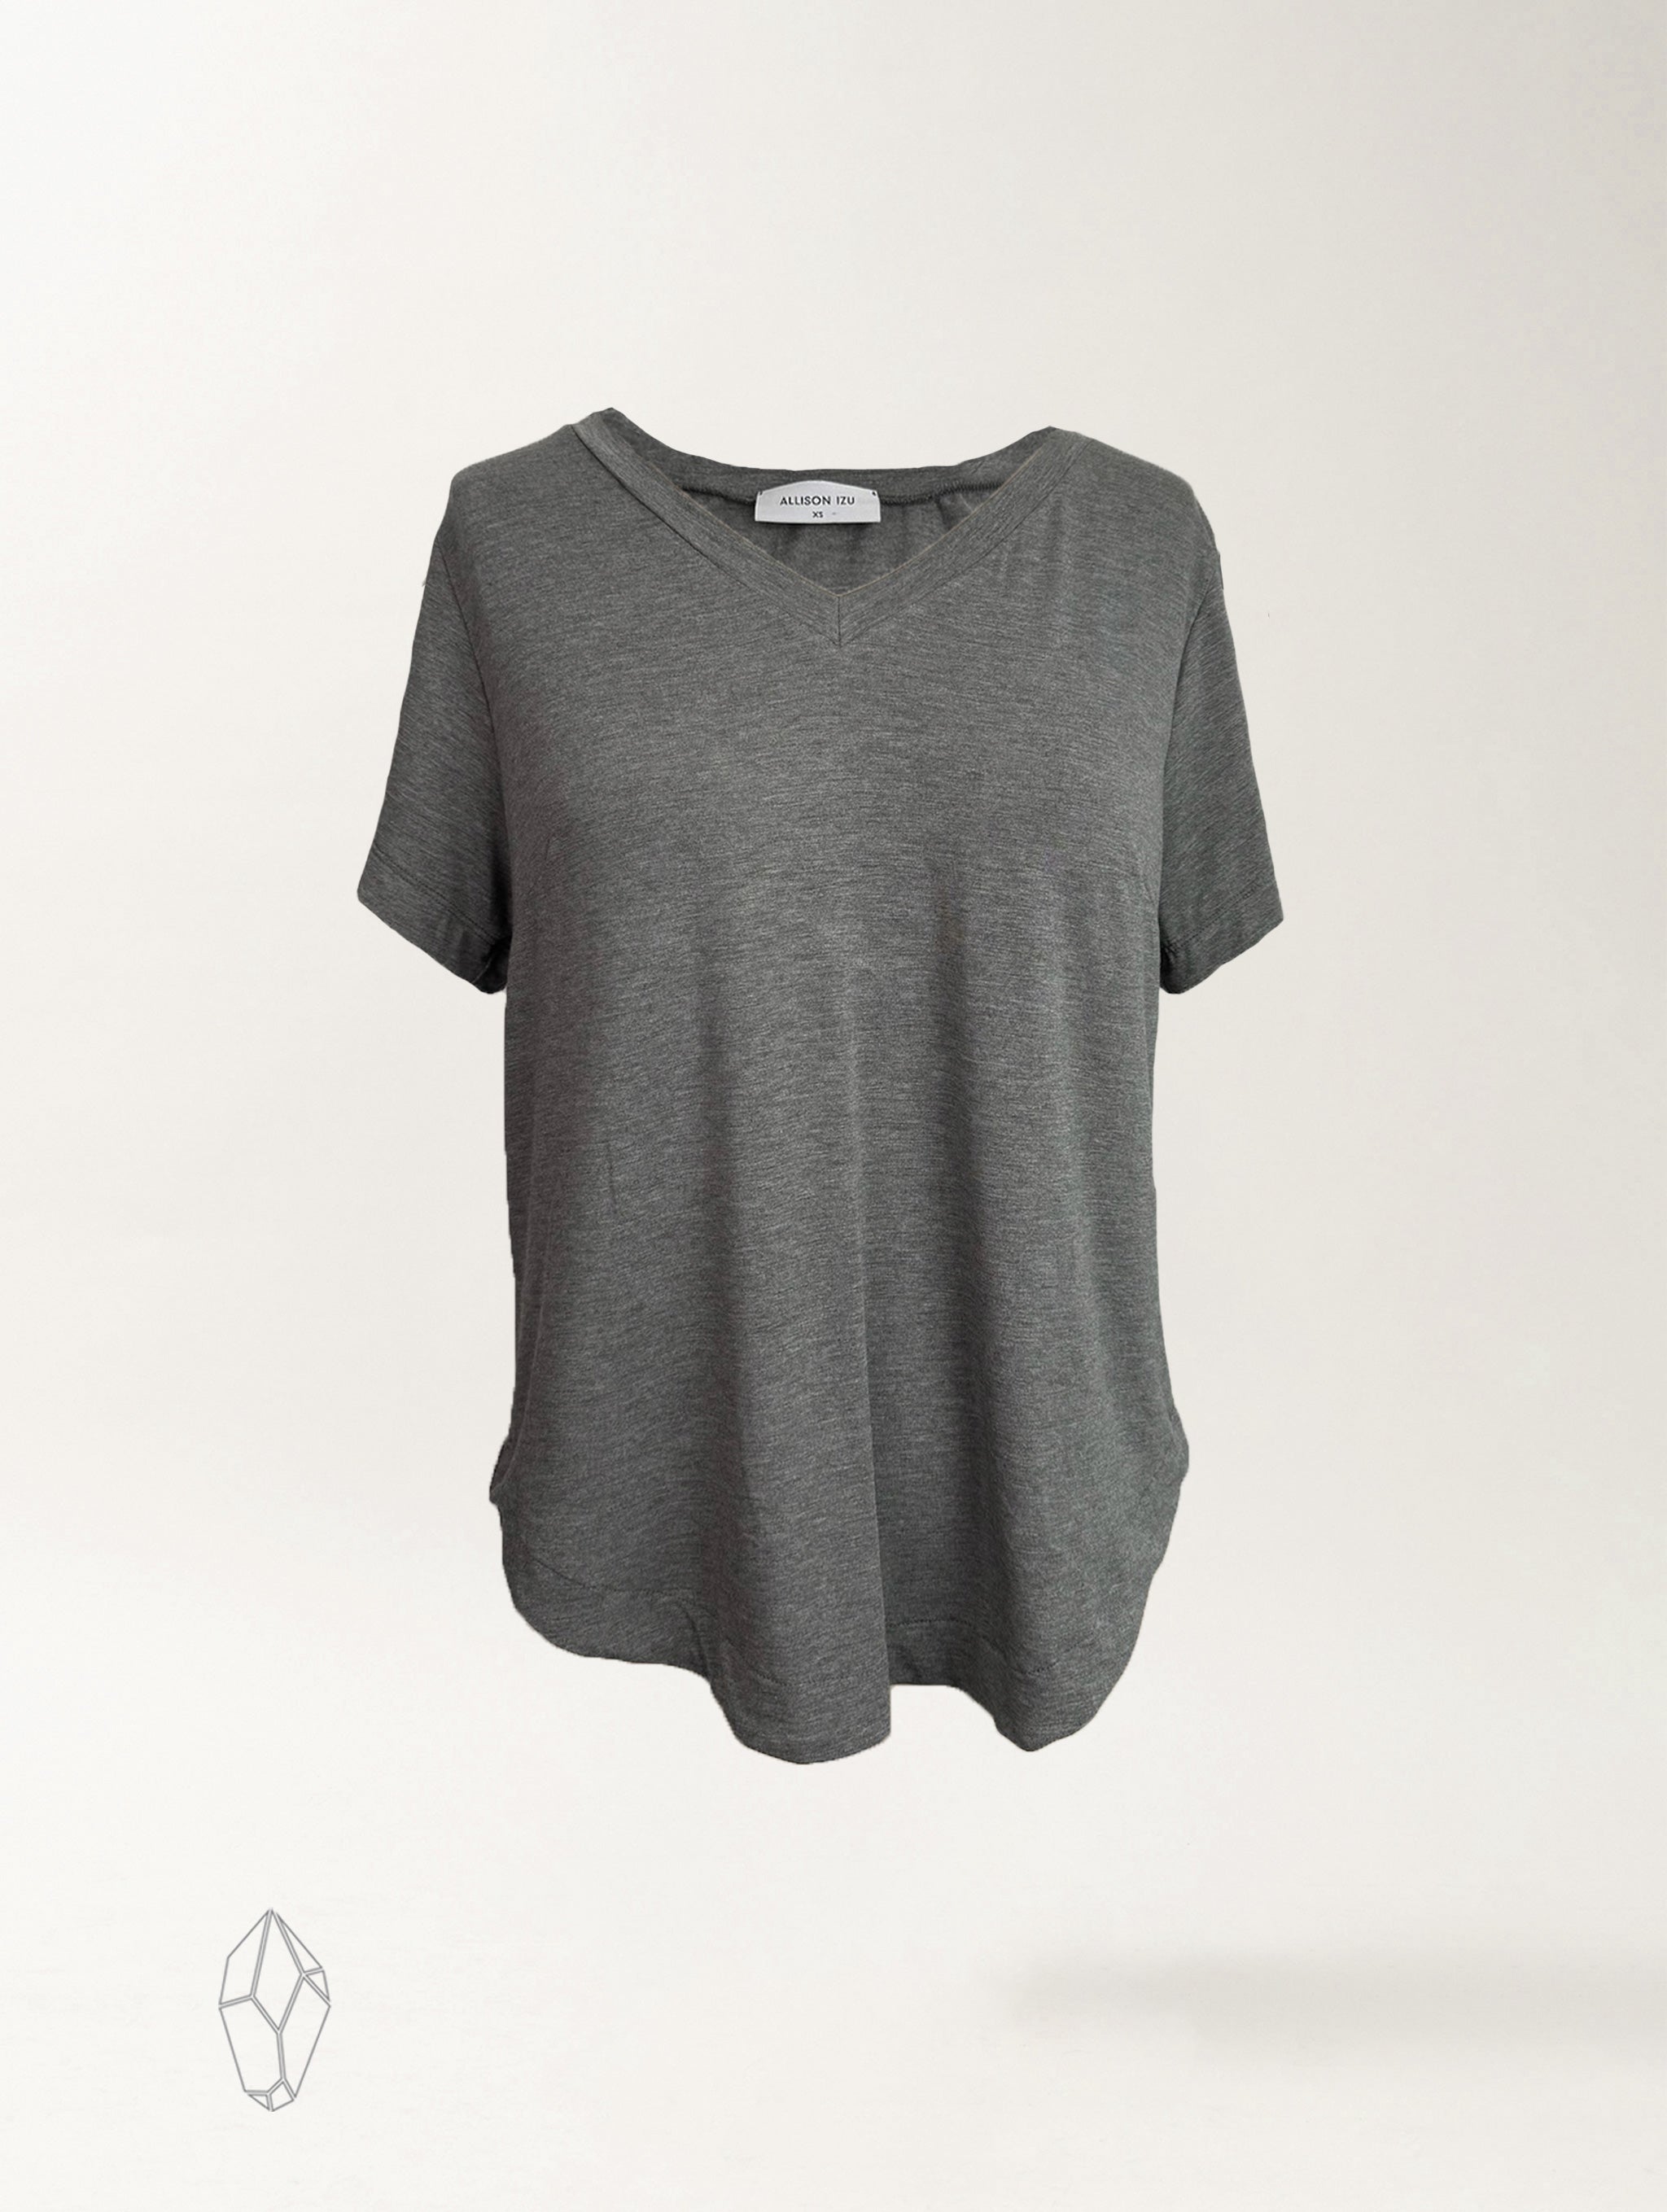 Becca Top - Charcoal Rayon Jersey